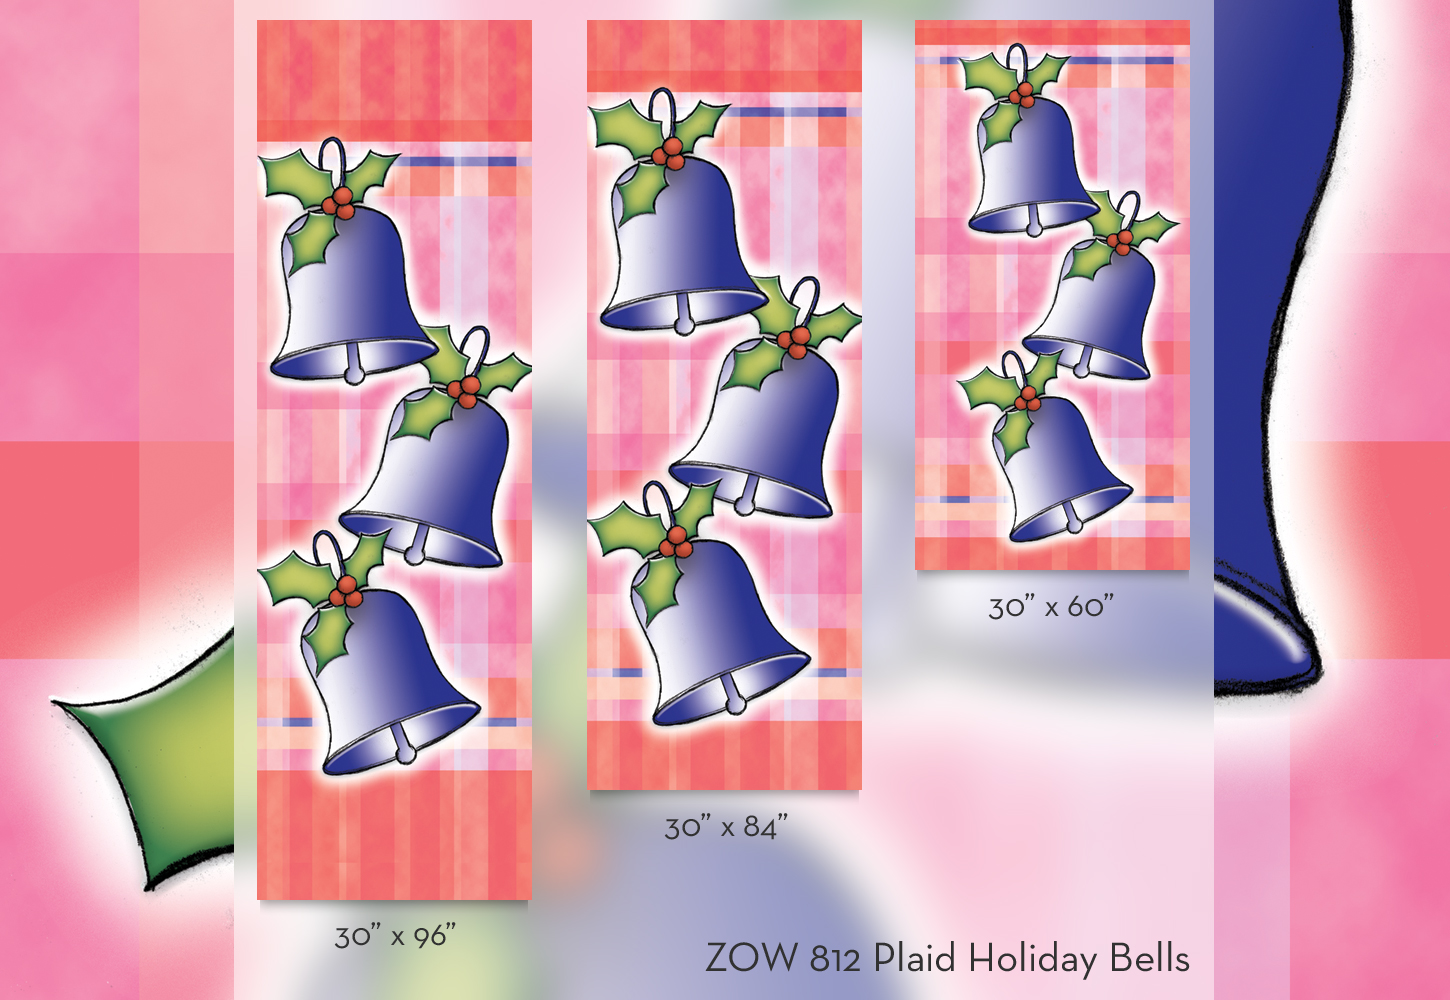 ZOW 812 Plaid Holiday Bells